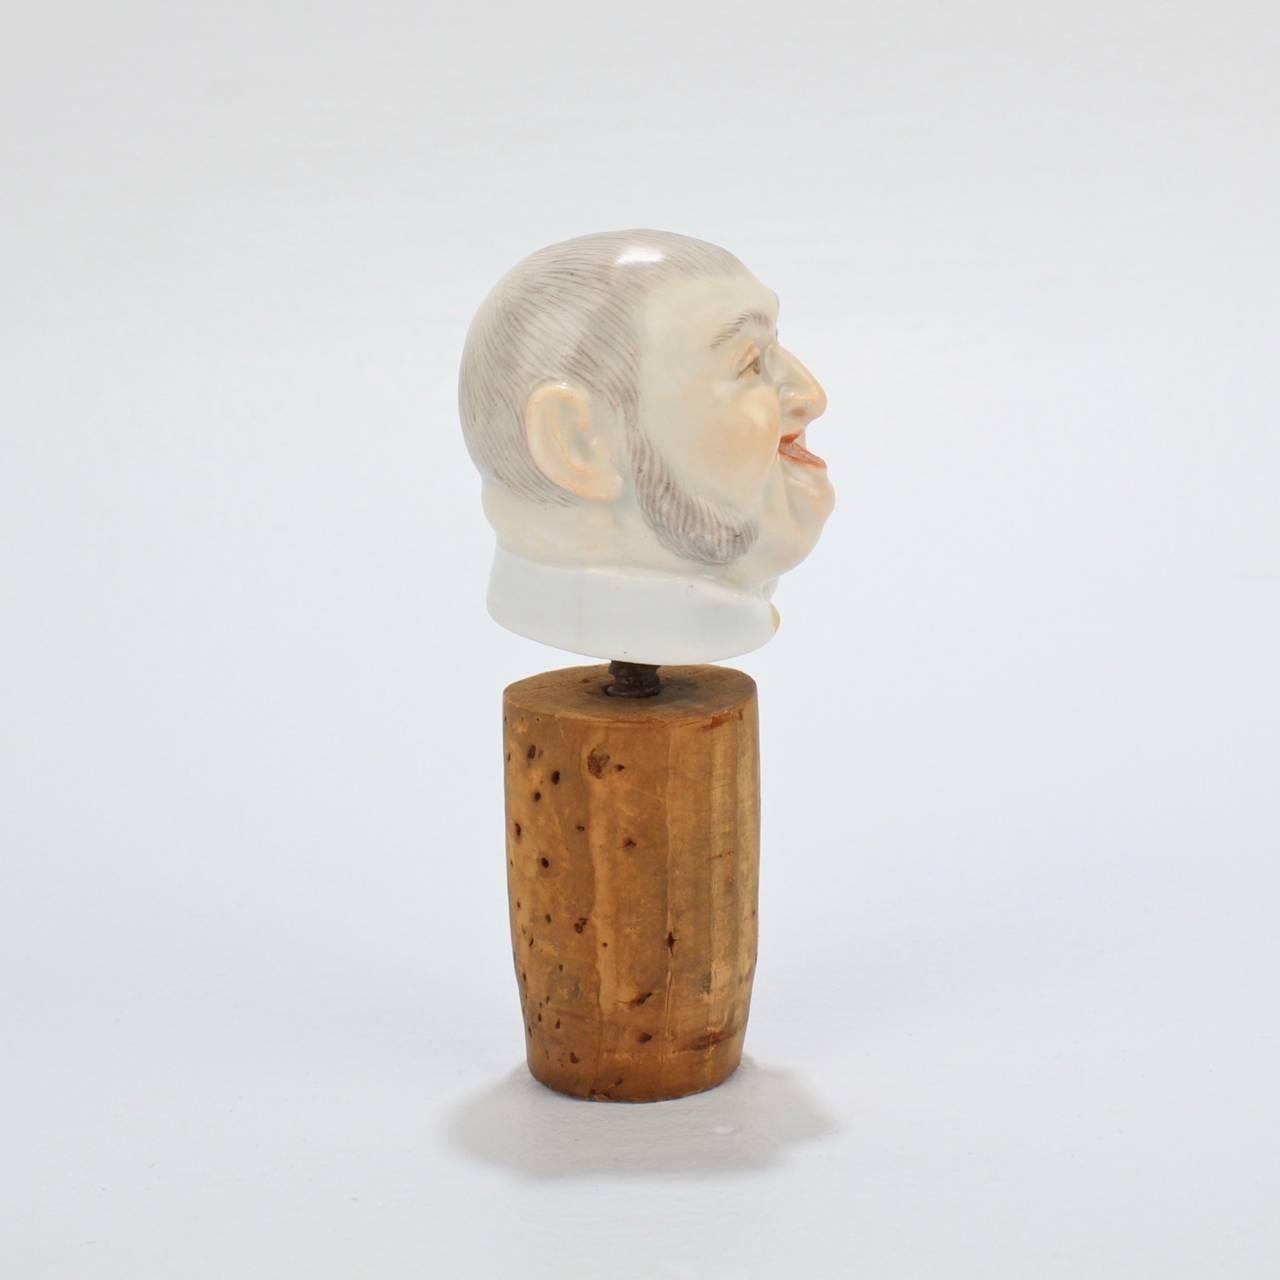 A fine and rare Meissen Porcelain figural bottle stopper or cork decoration.

The figural stopper depicts the bust of a jovial man mounted with an threaded iron stem meant to screw into a bottle's cork.

These forms were quite popular in the